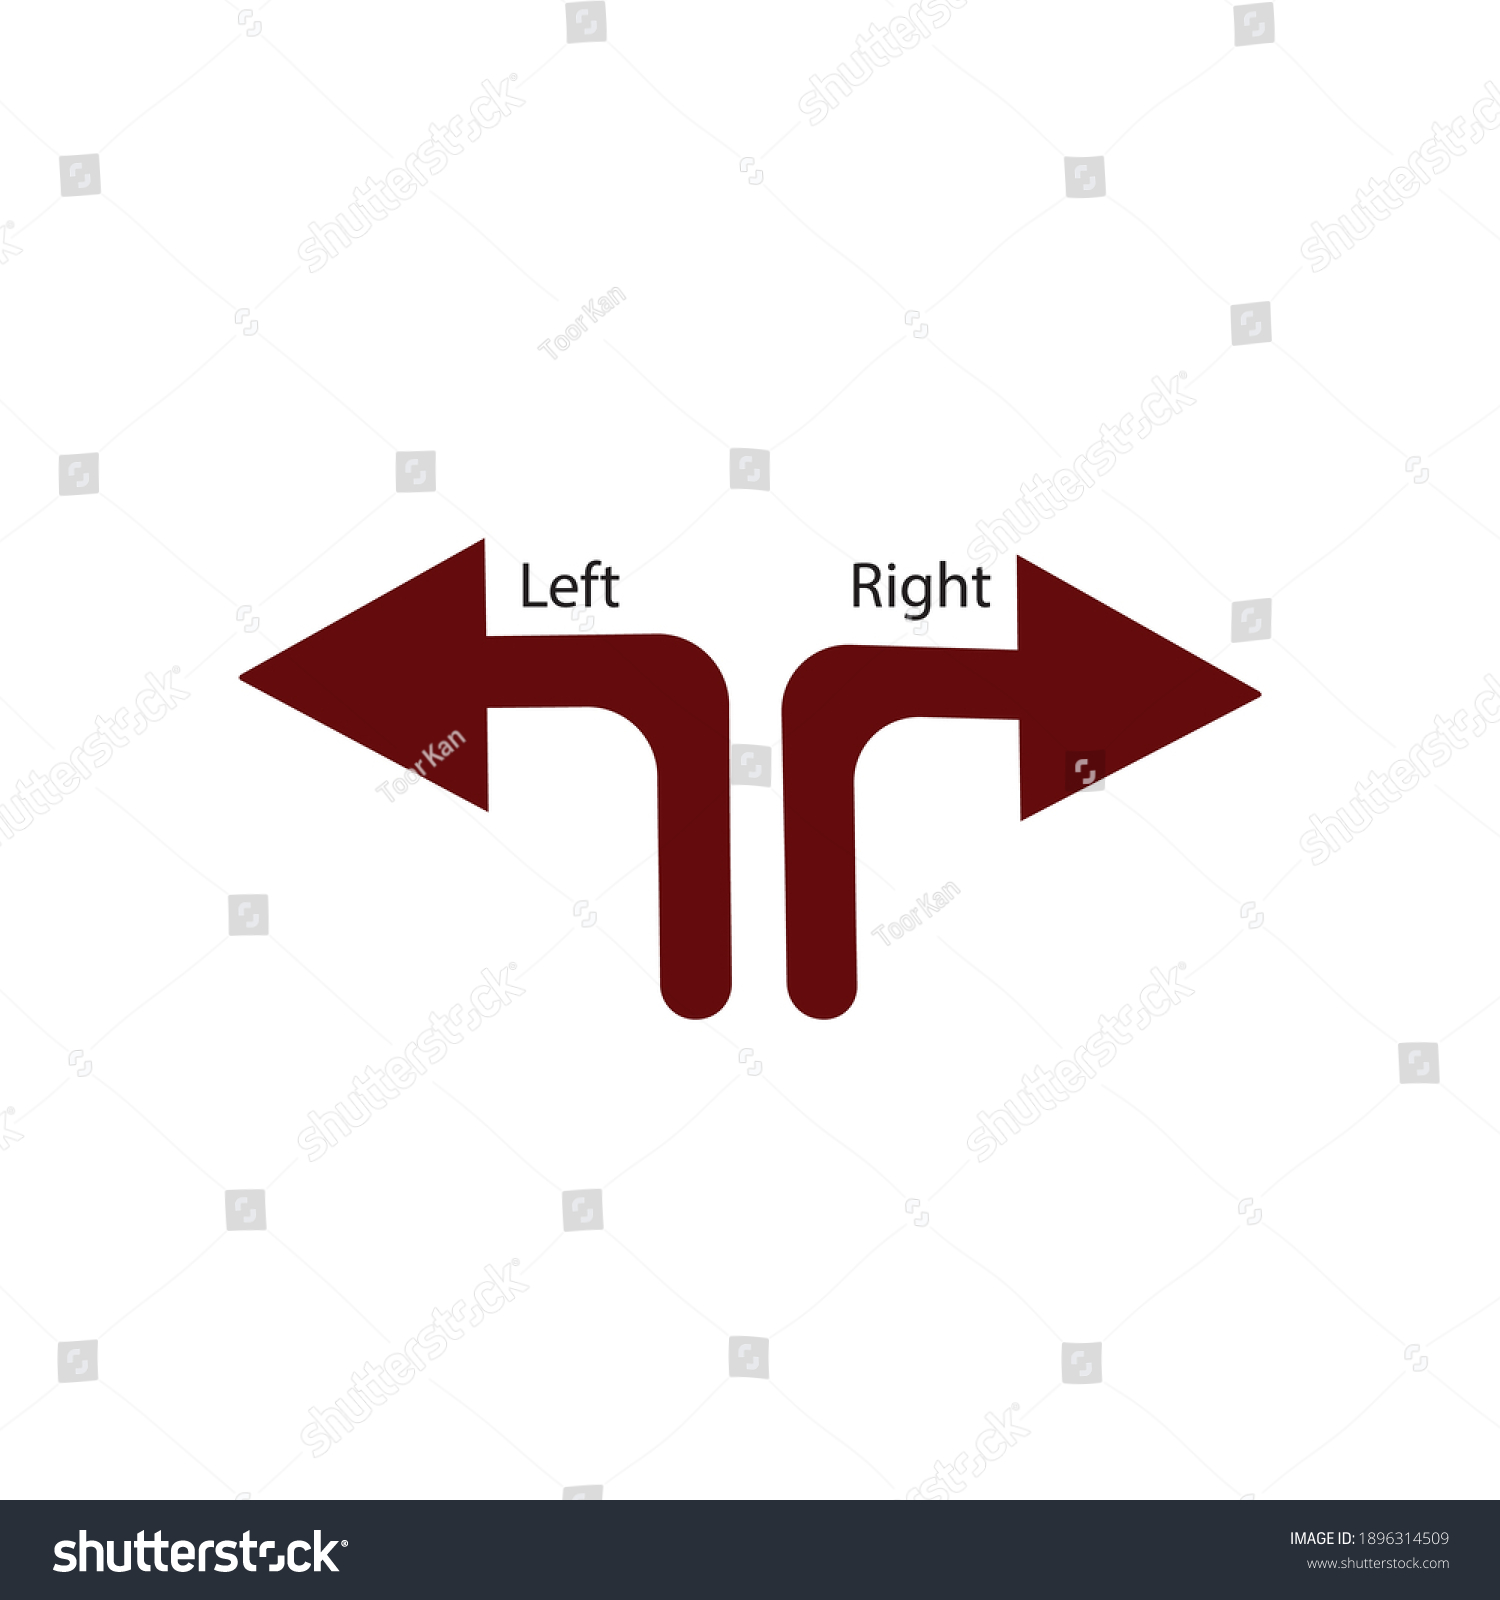 Curved Arrow Icon Arrows Showing Left Stock Vector (Royalty Free ...